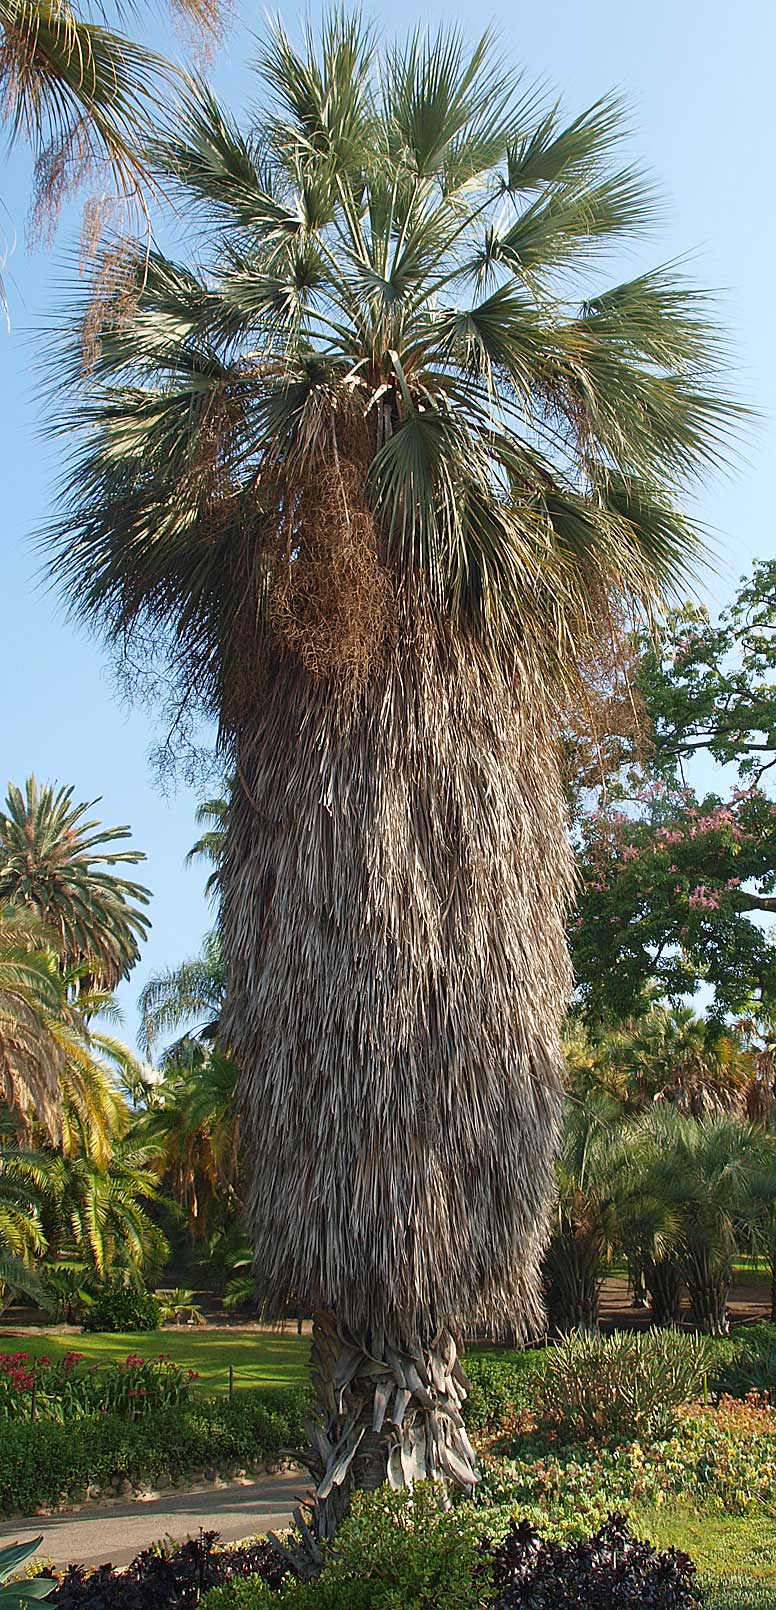   Brahea armata  mature palm in landscape with marcescent leaves 